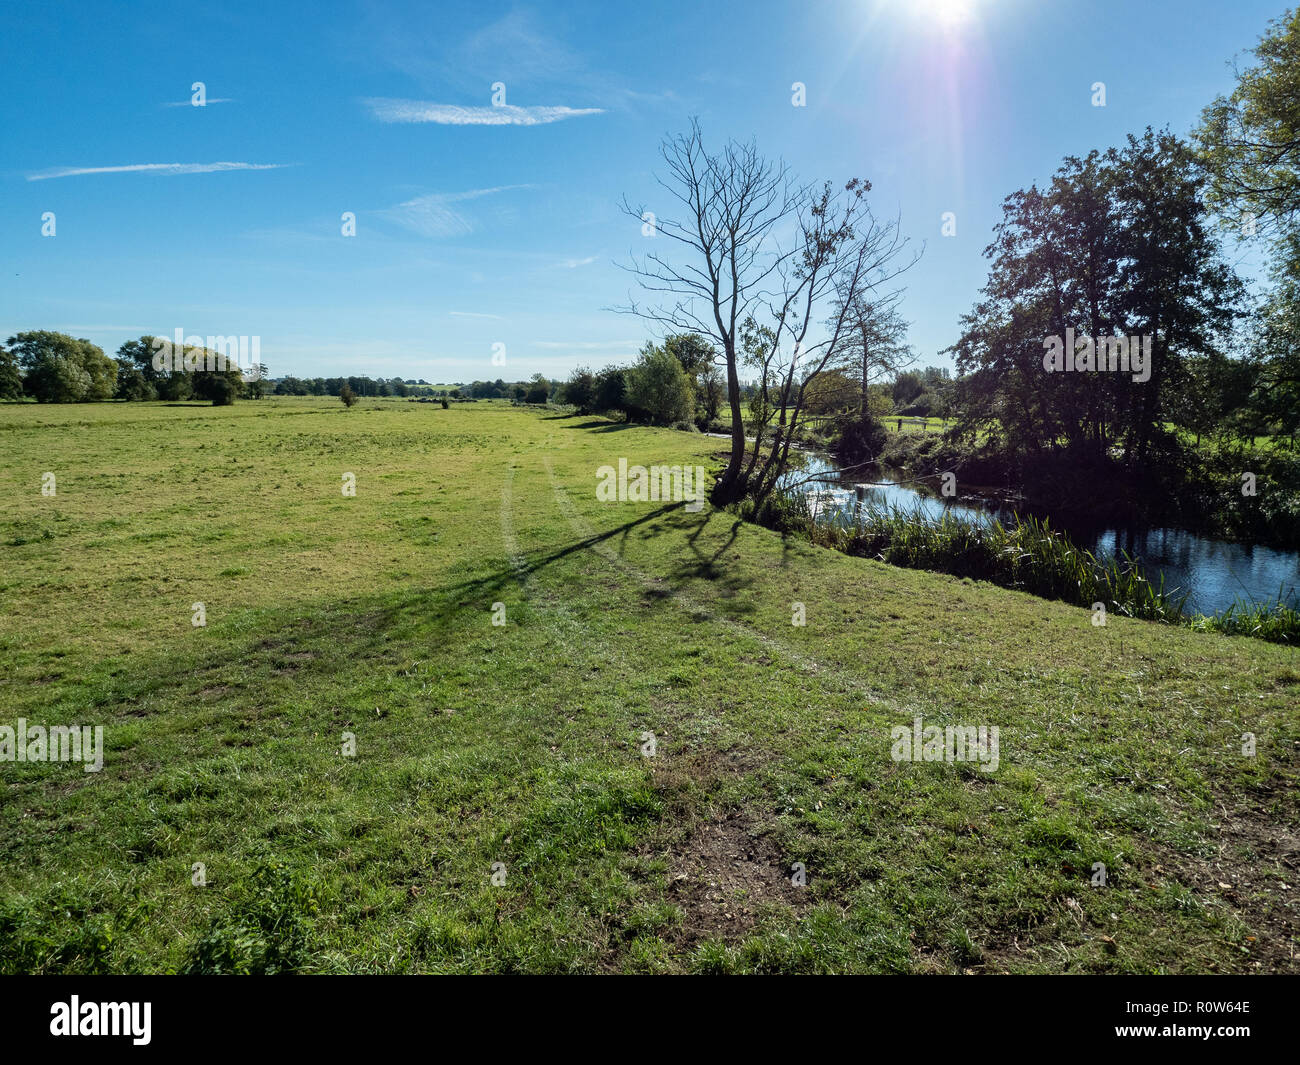 A peaceful scene in the Waveney Valley on a bright sunny day Stock Photo